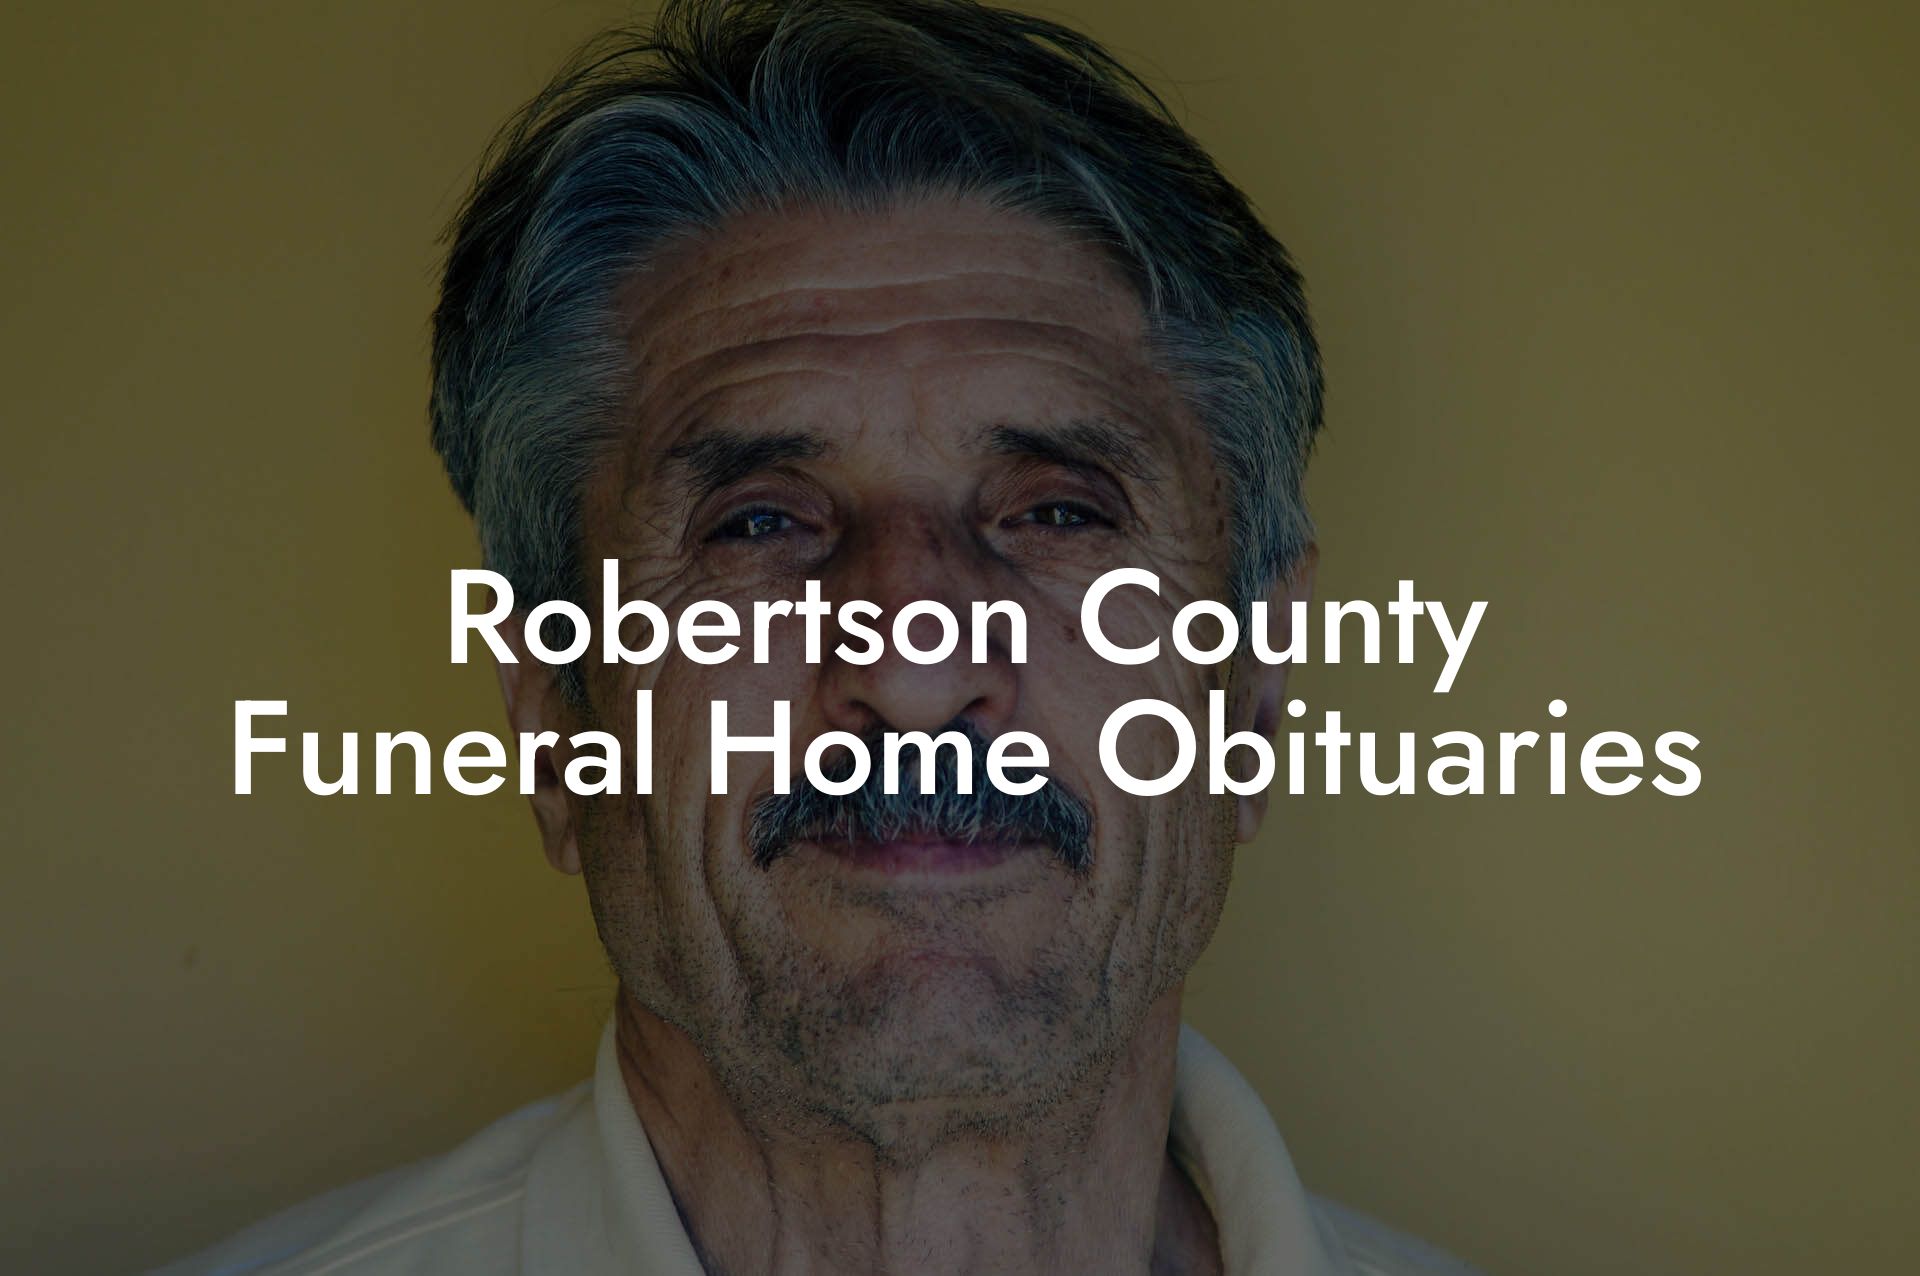 Robertson County Funeral Home Obituaries